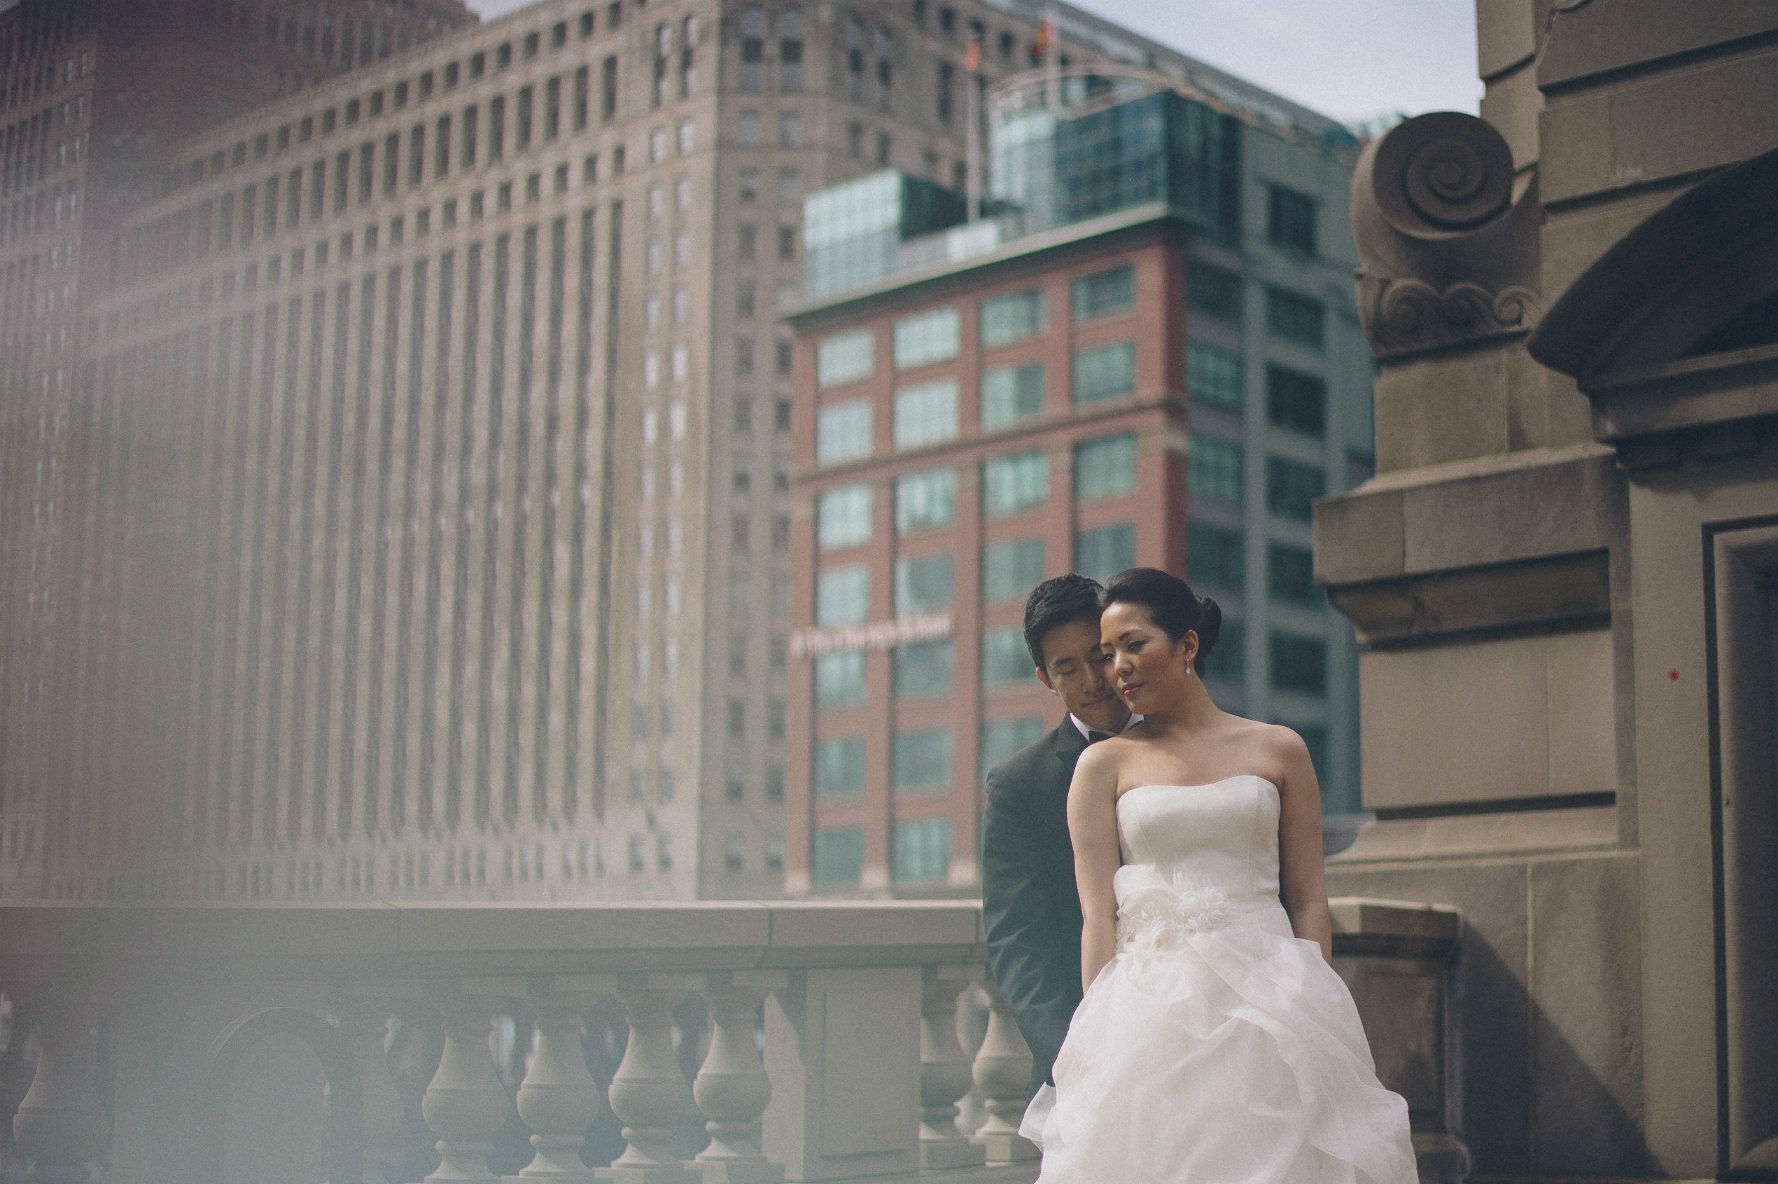 30.-Rookery-Wedding.-This-is-Feeling-Photography.-Sweetchic-Events.-Chicago-River.-Architectural.-Bridge..jpg